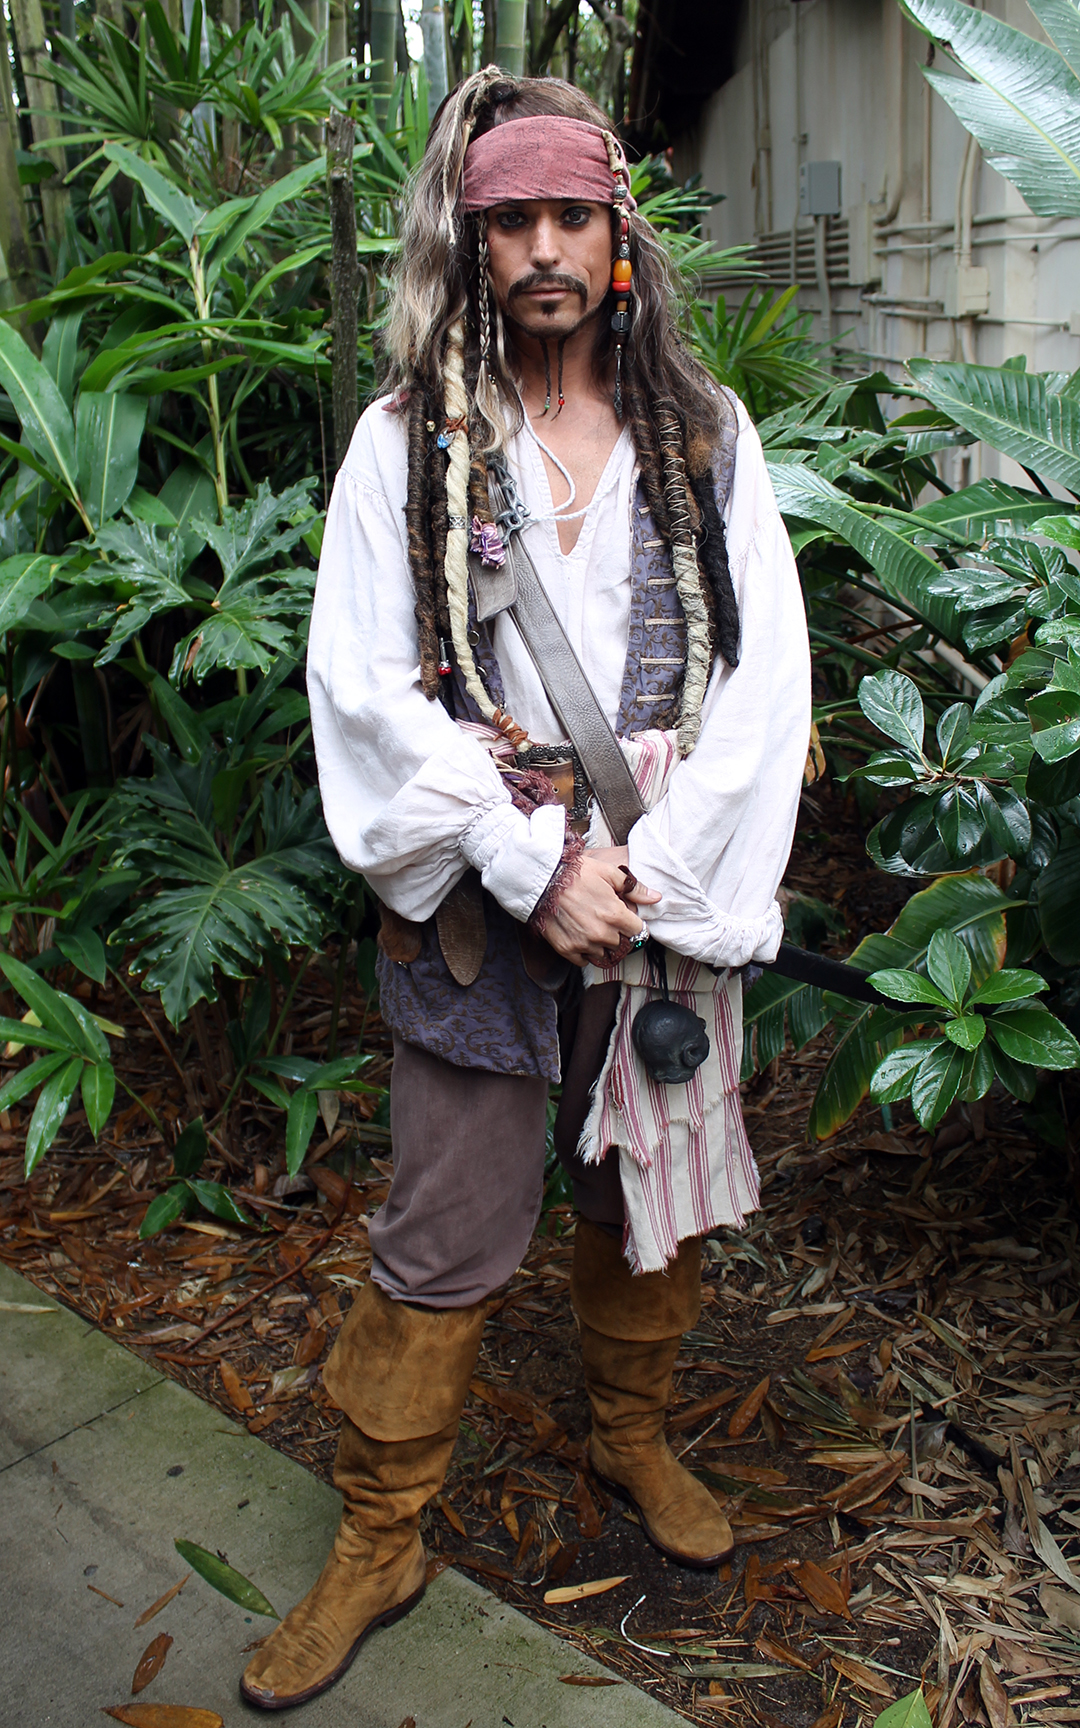 Limited Time Magic Pirates Week Jack Sparrow